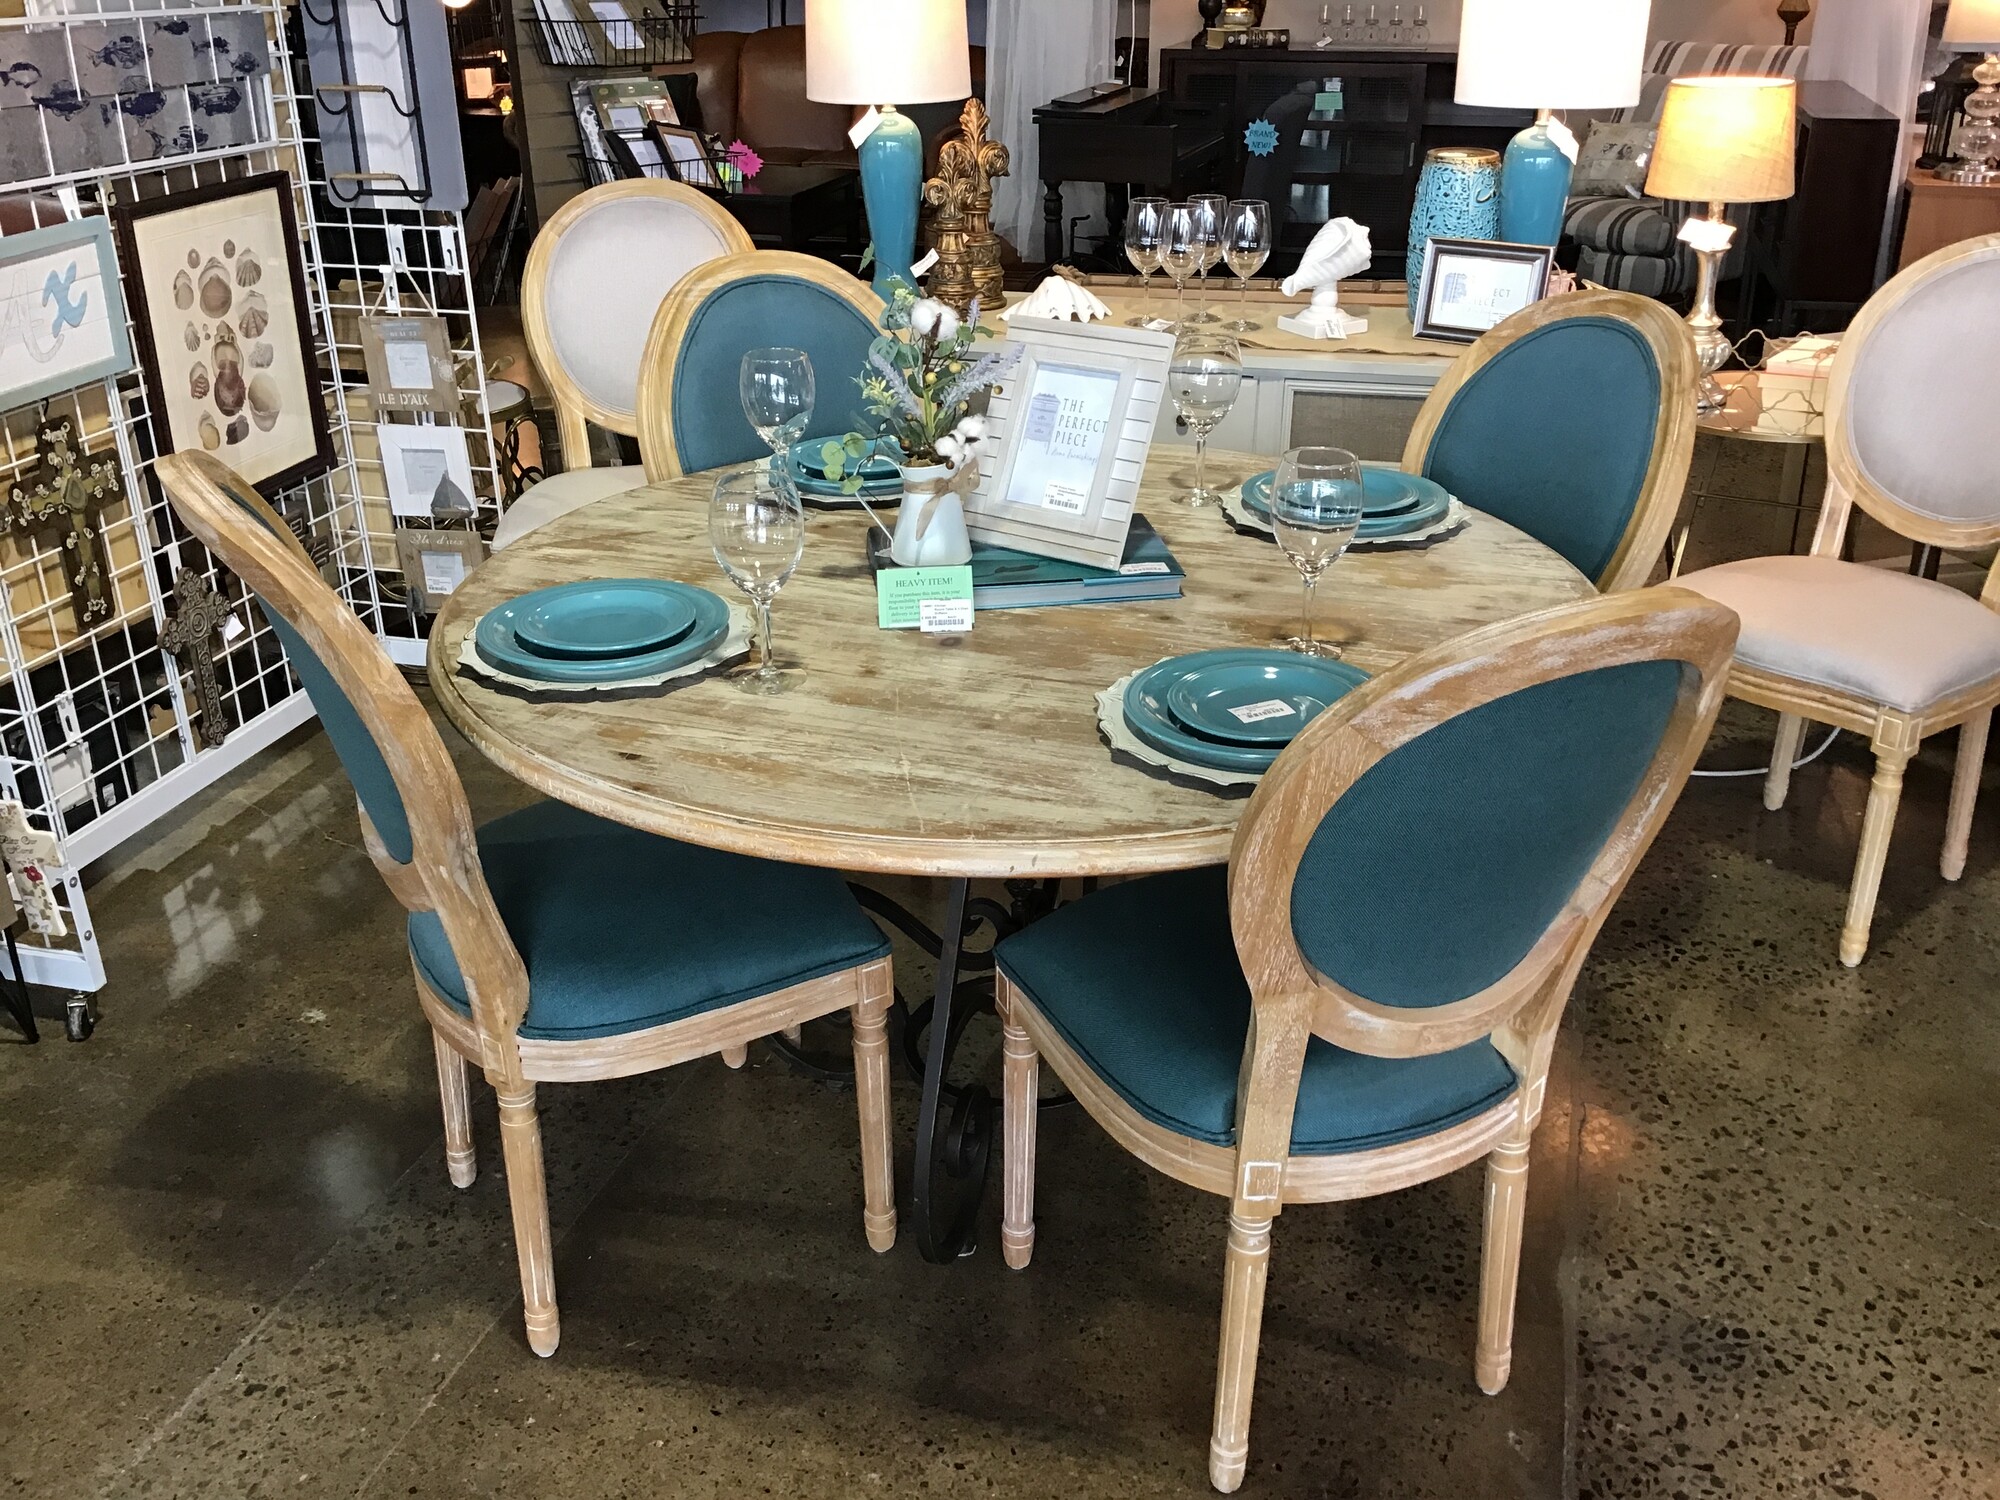 This beautiful round table has a driftwood finish on the table top and a beautiful metal iron base. The chairs have the driftwood frame and the seats and back are upholstered in a gorgeous teal fabric. This set is simply gorgeous!

Table Dimensions are 54 in x 31 in
Chair Dimensions are 21 in x 19 in x 40 in